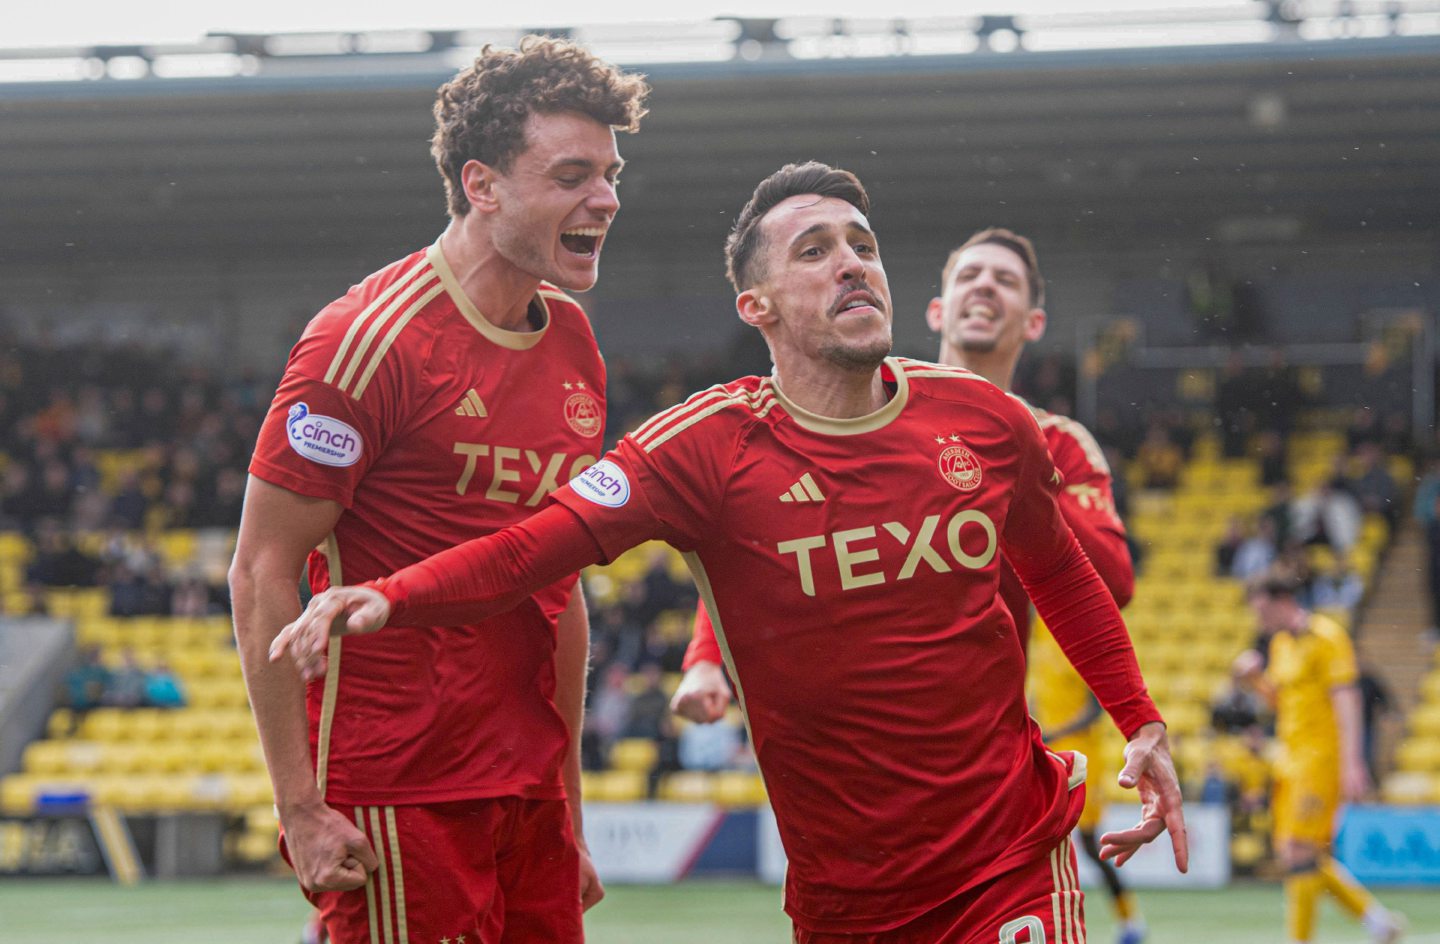 Aberdeen's Bojan Miovski celebrates with Dante Polvara after scoring late on - only for the goal to be disallowed. Image: SNS